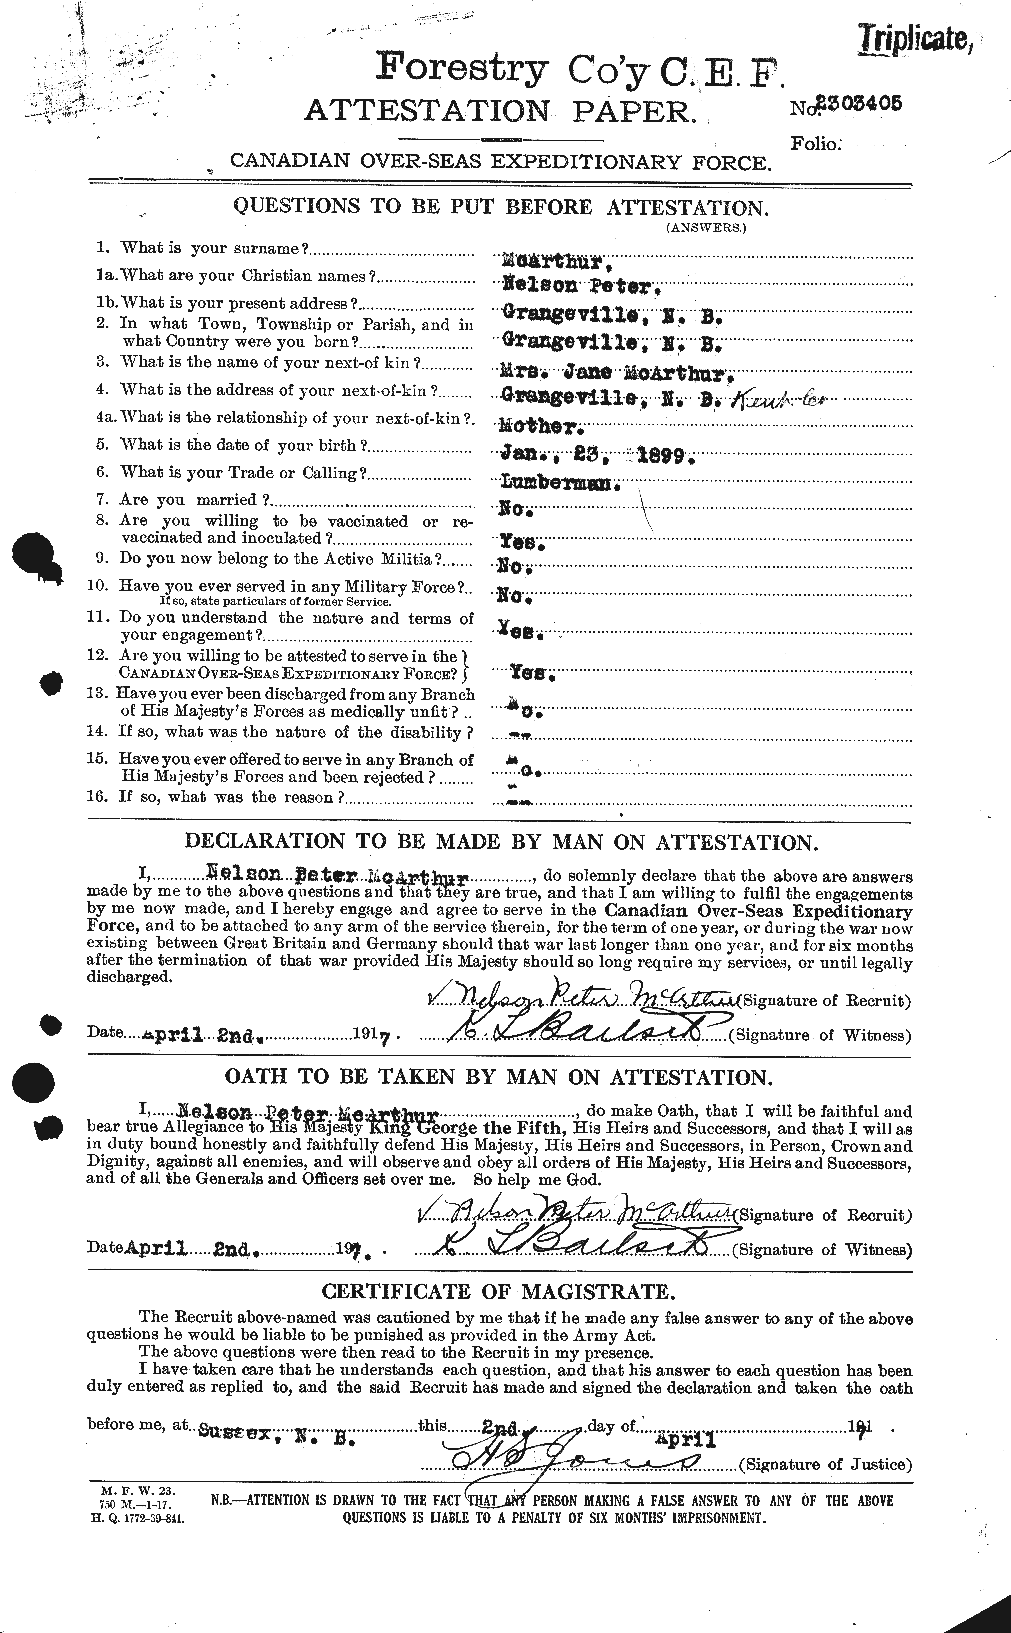 Personnel Records of the First World War - CEF 130688a